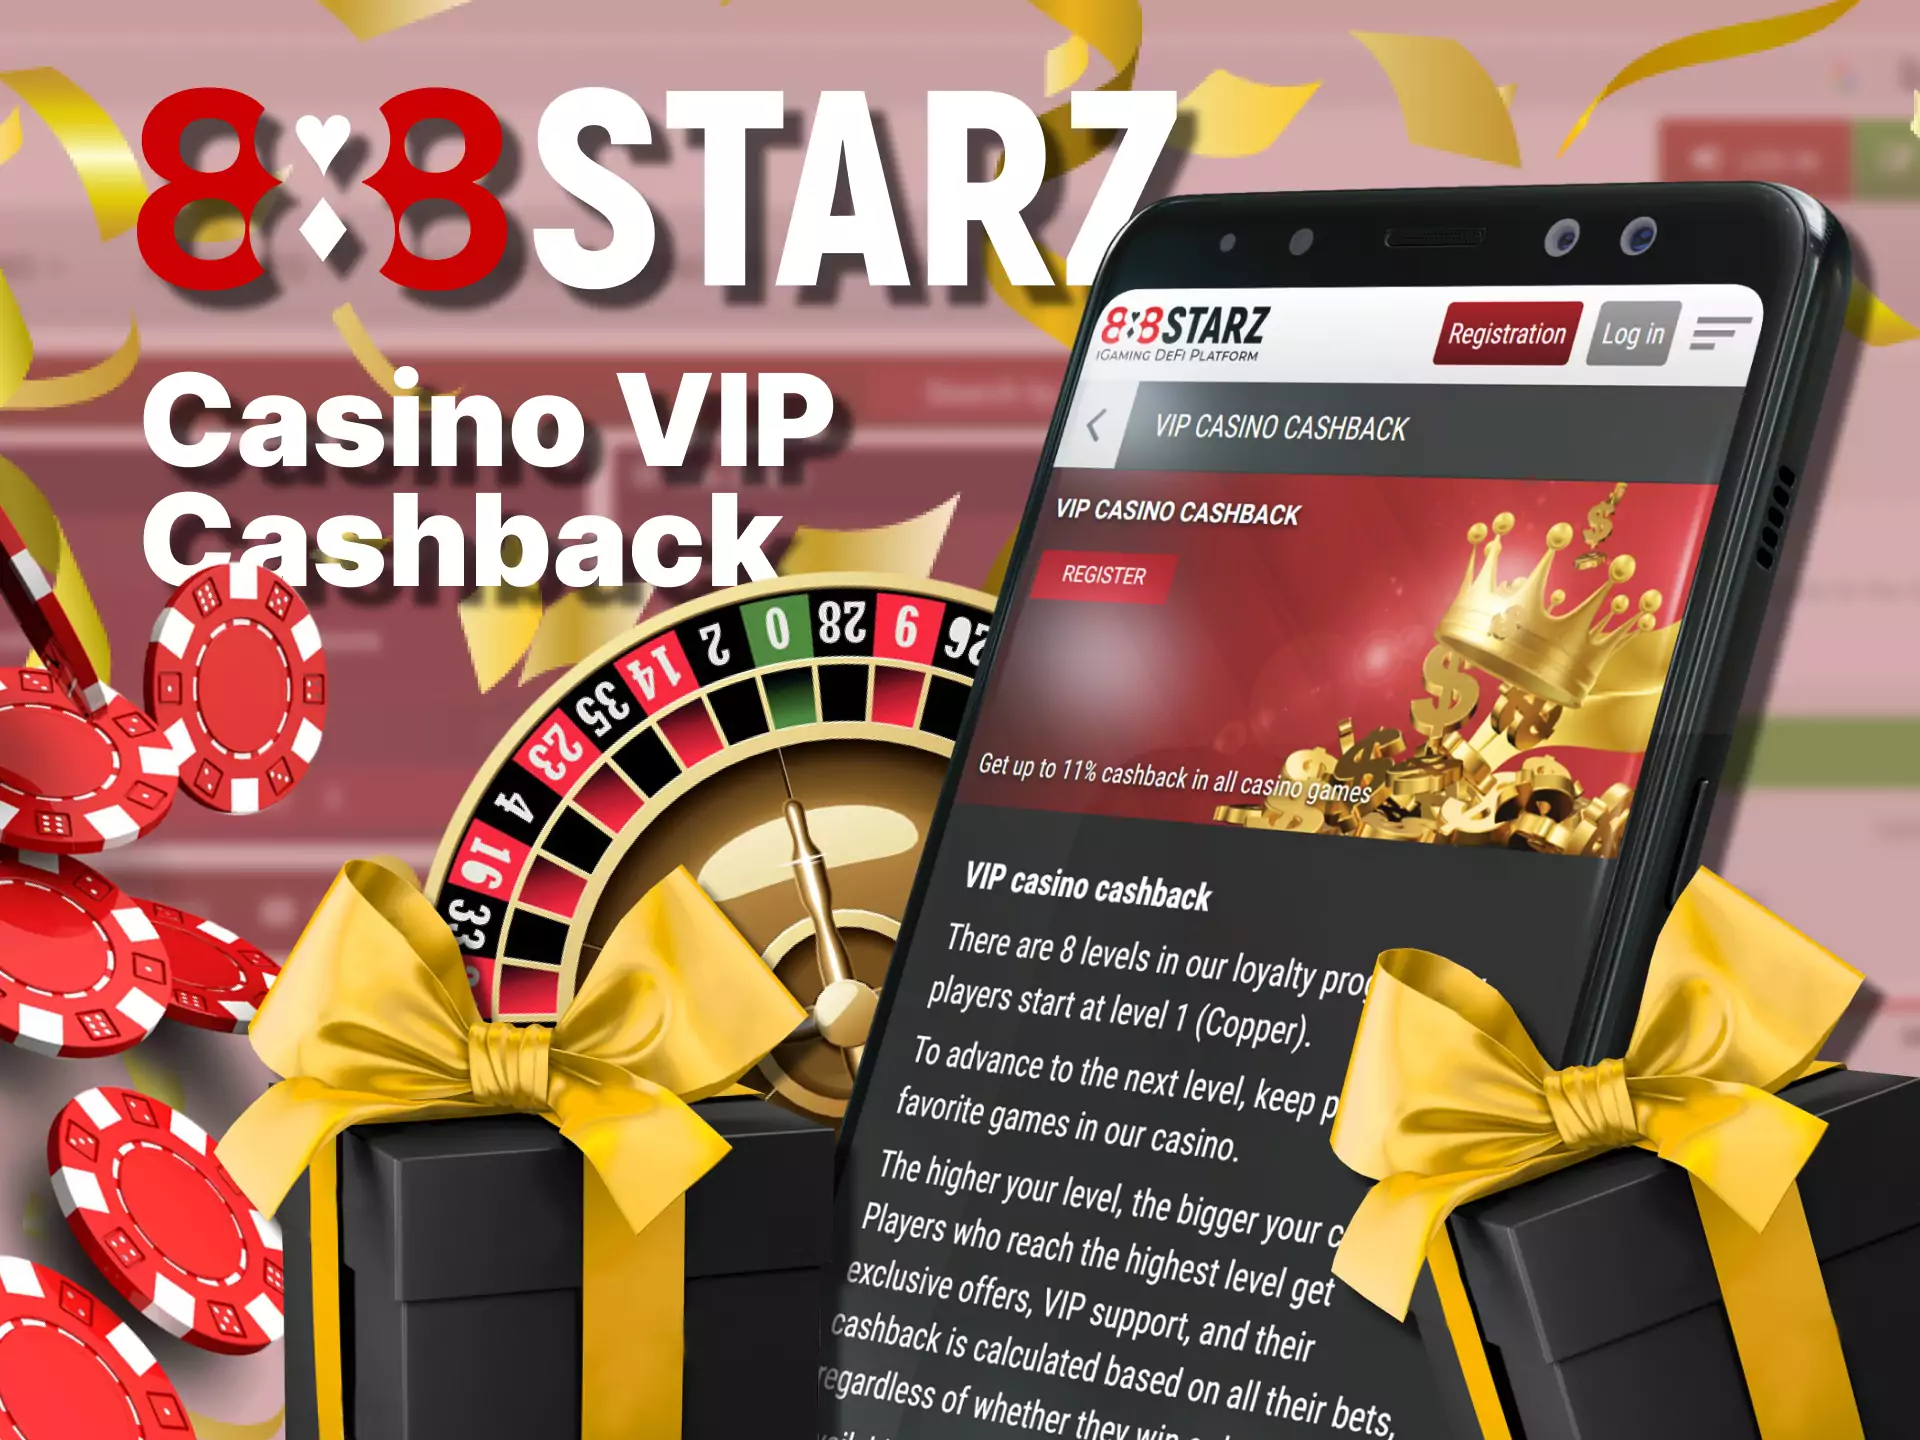 Get your special VIP Casino Cashback in the 888starz app.